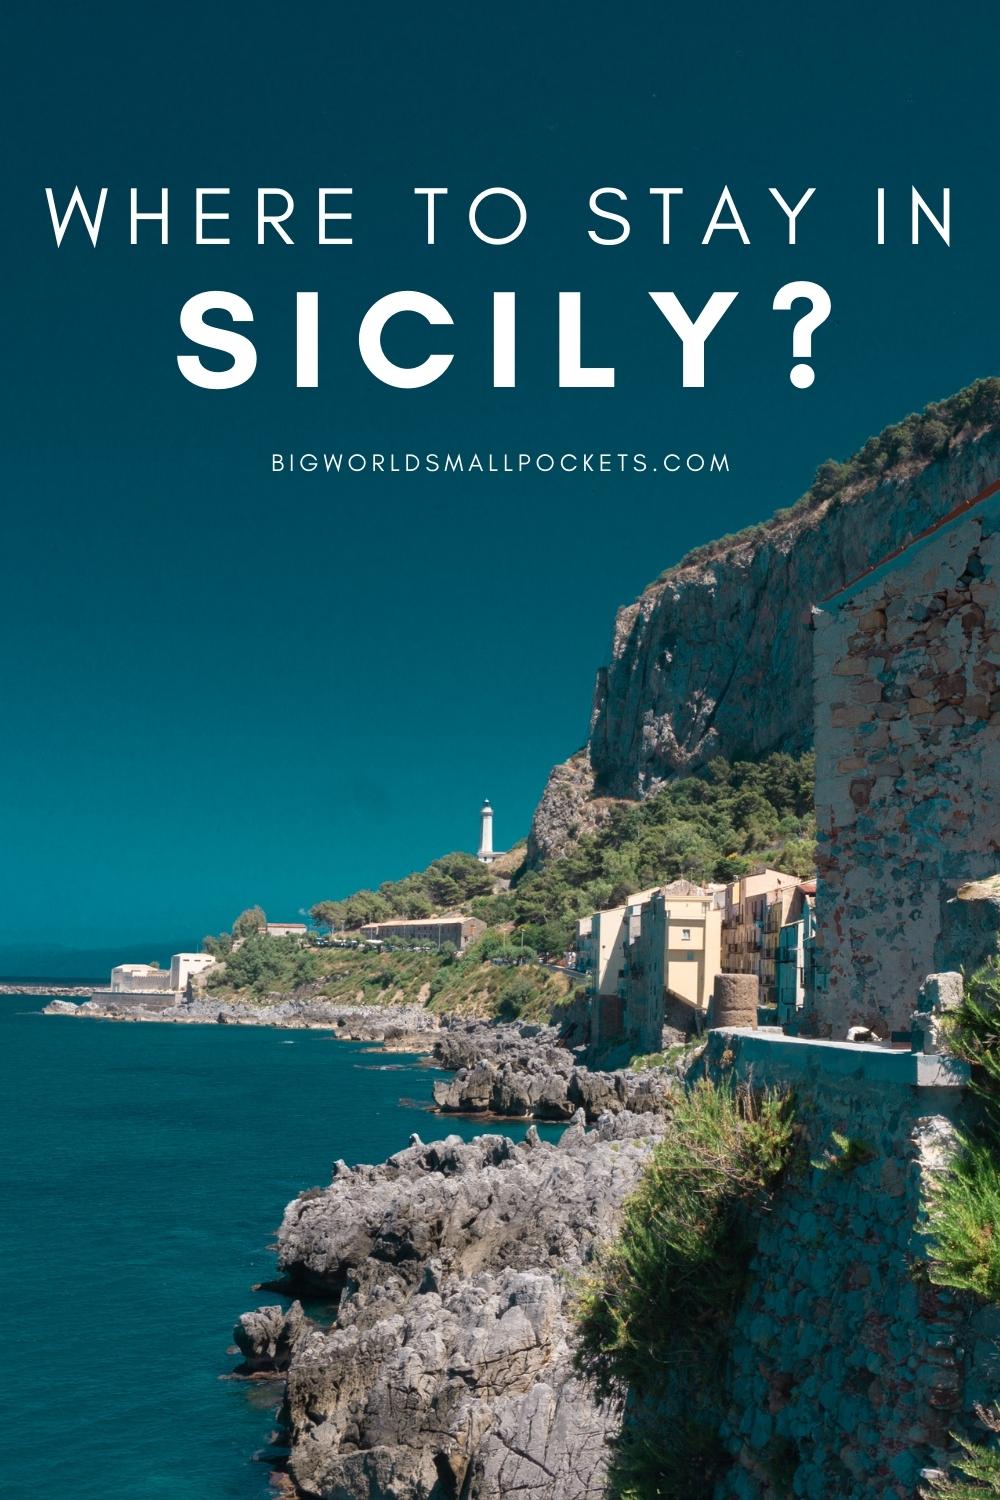 Where to Stay in Sicily, Italy?